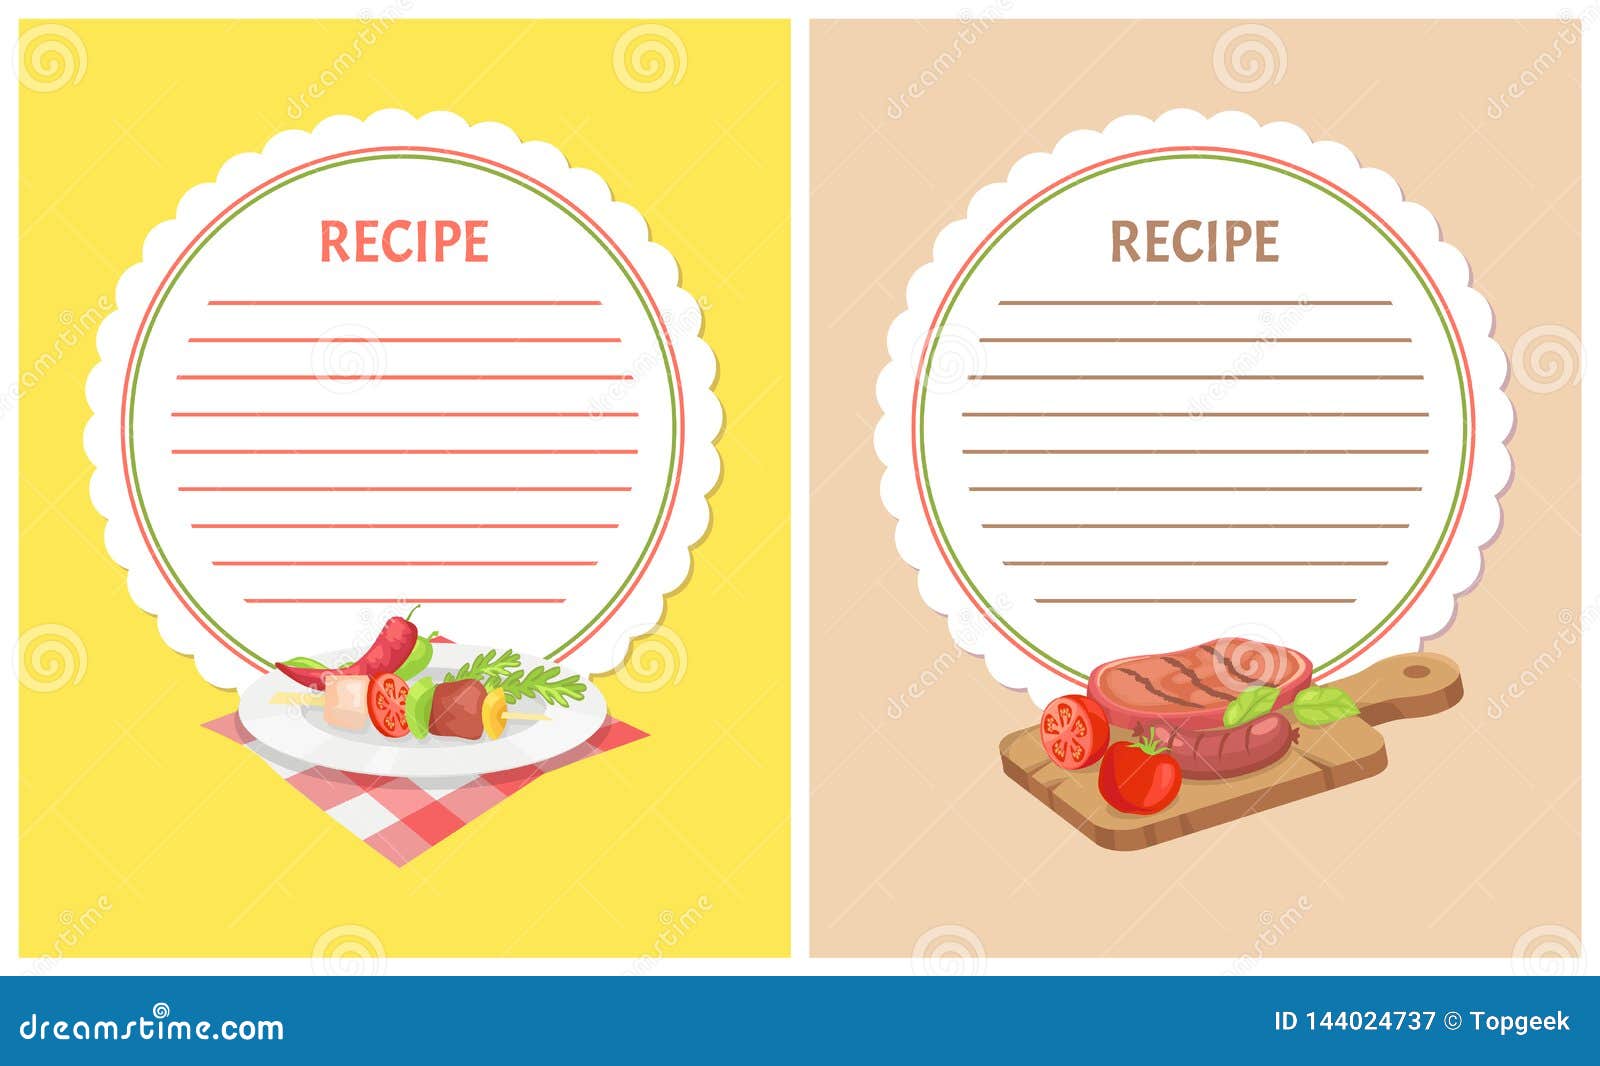 Download Recipe Menu Mockup With Food Ingredients On Plate Stock Vector Illustration Of Notice Blank 144024737